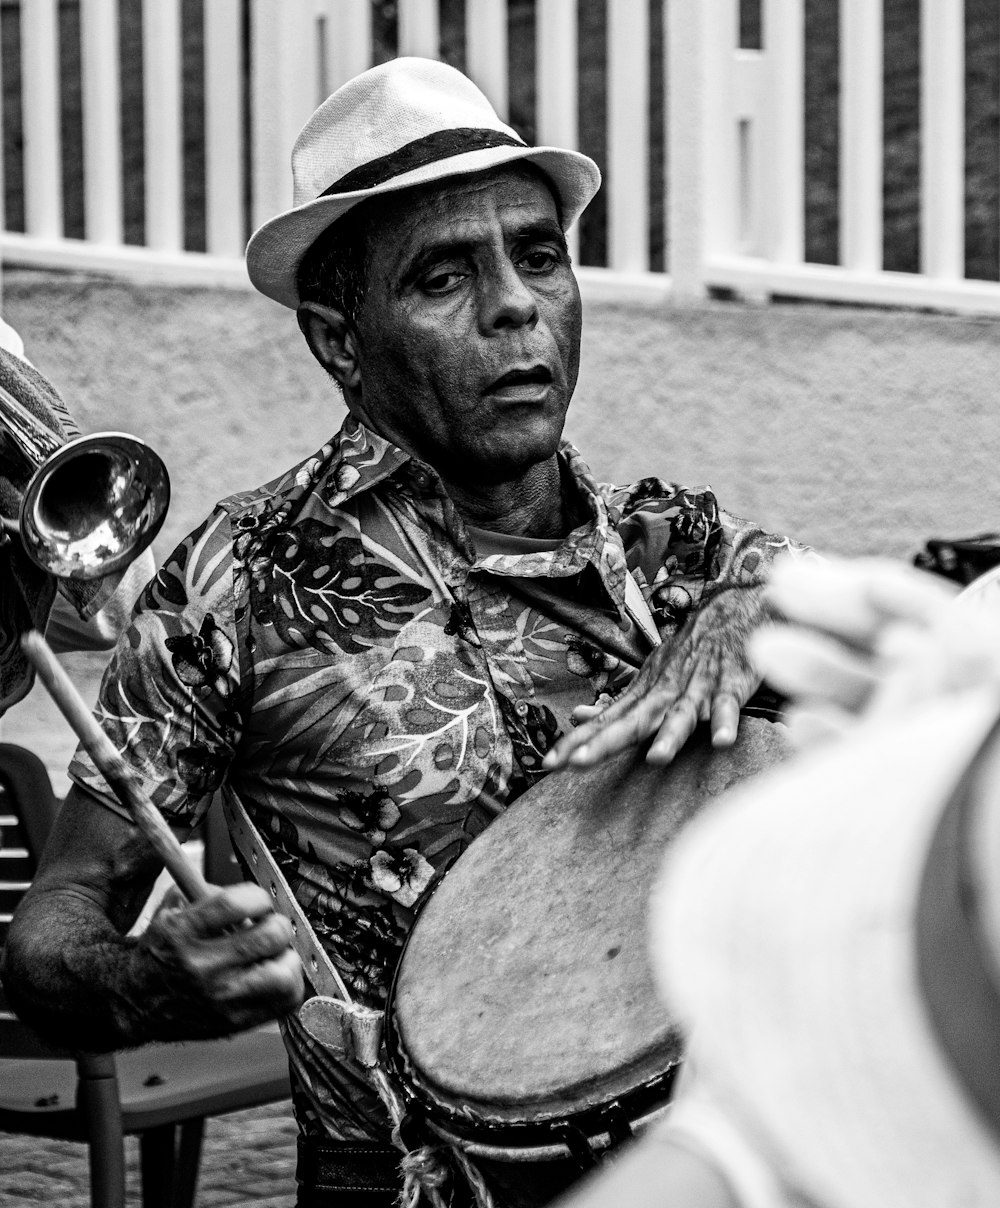 man playing musical instrument in grayscale photography